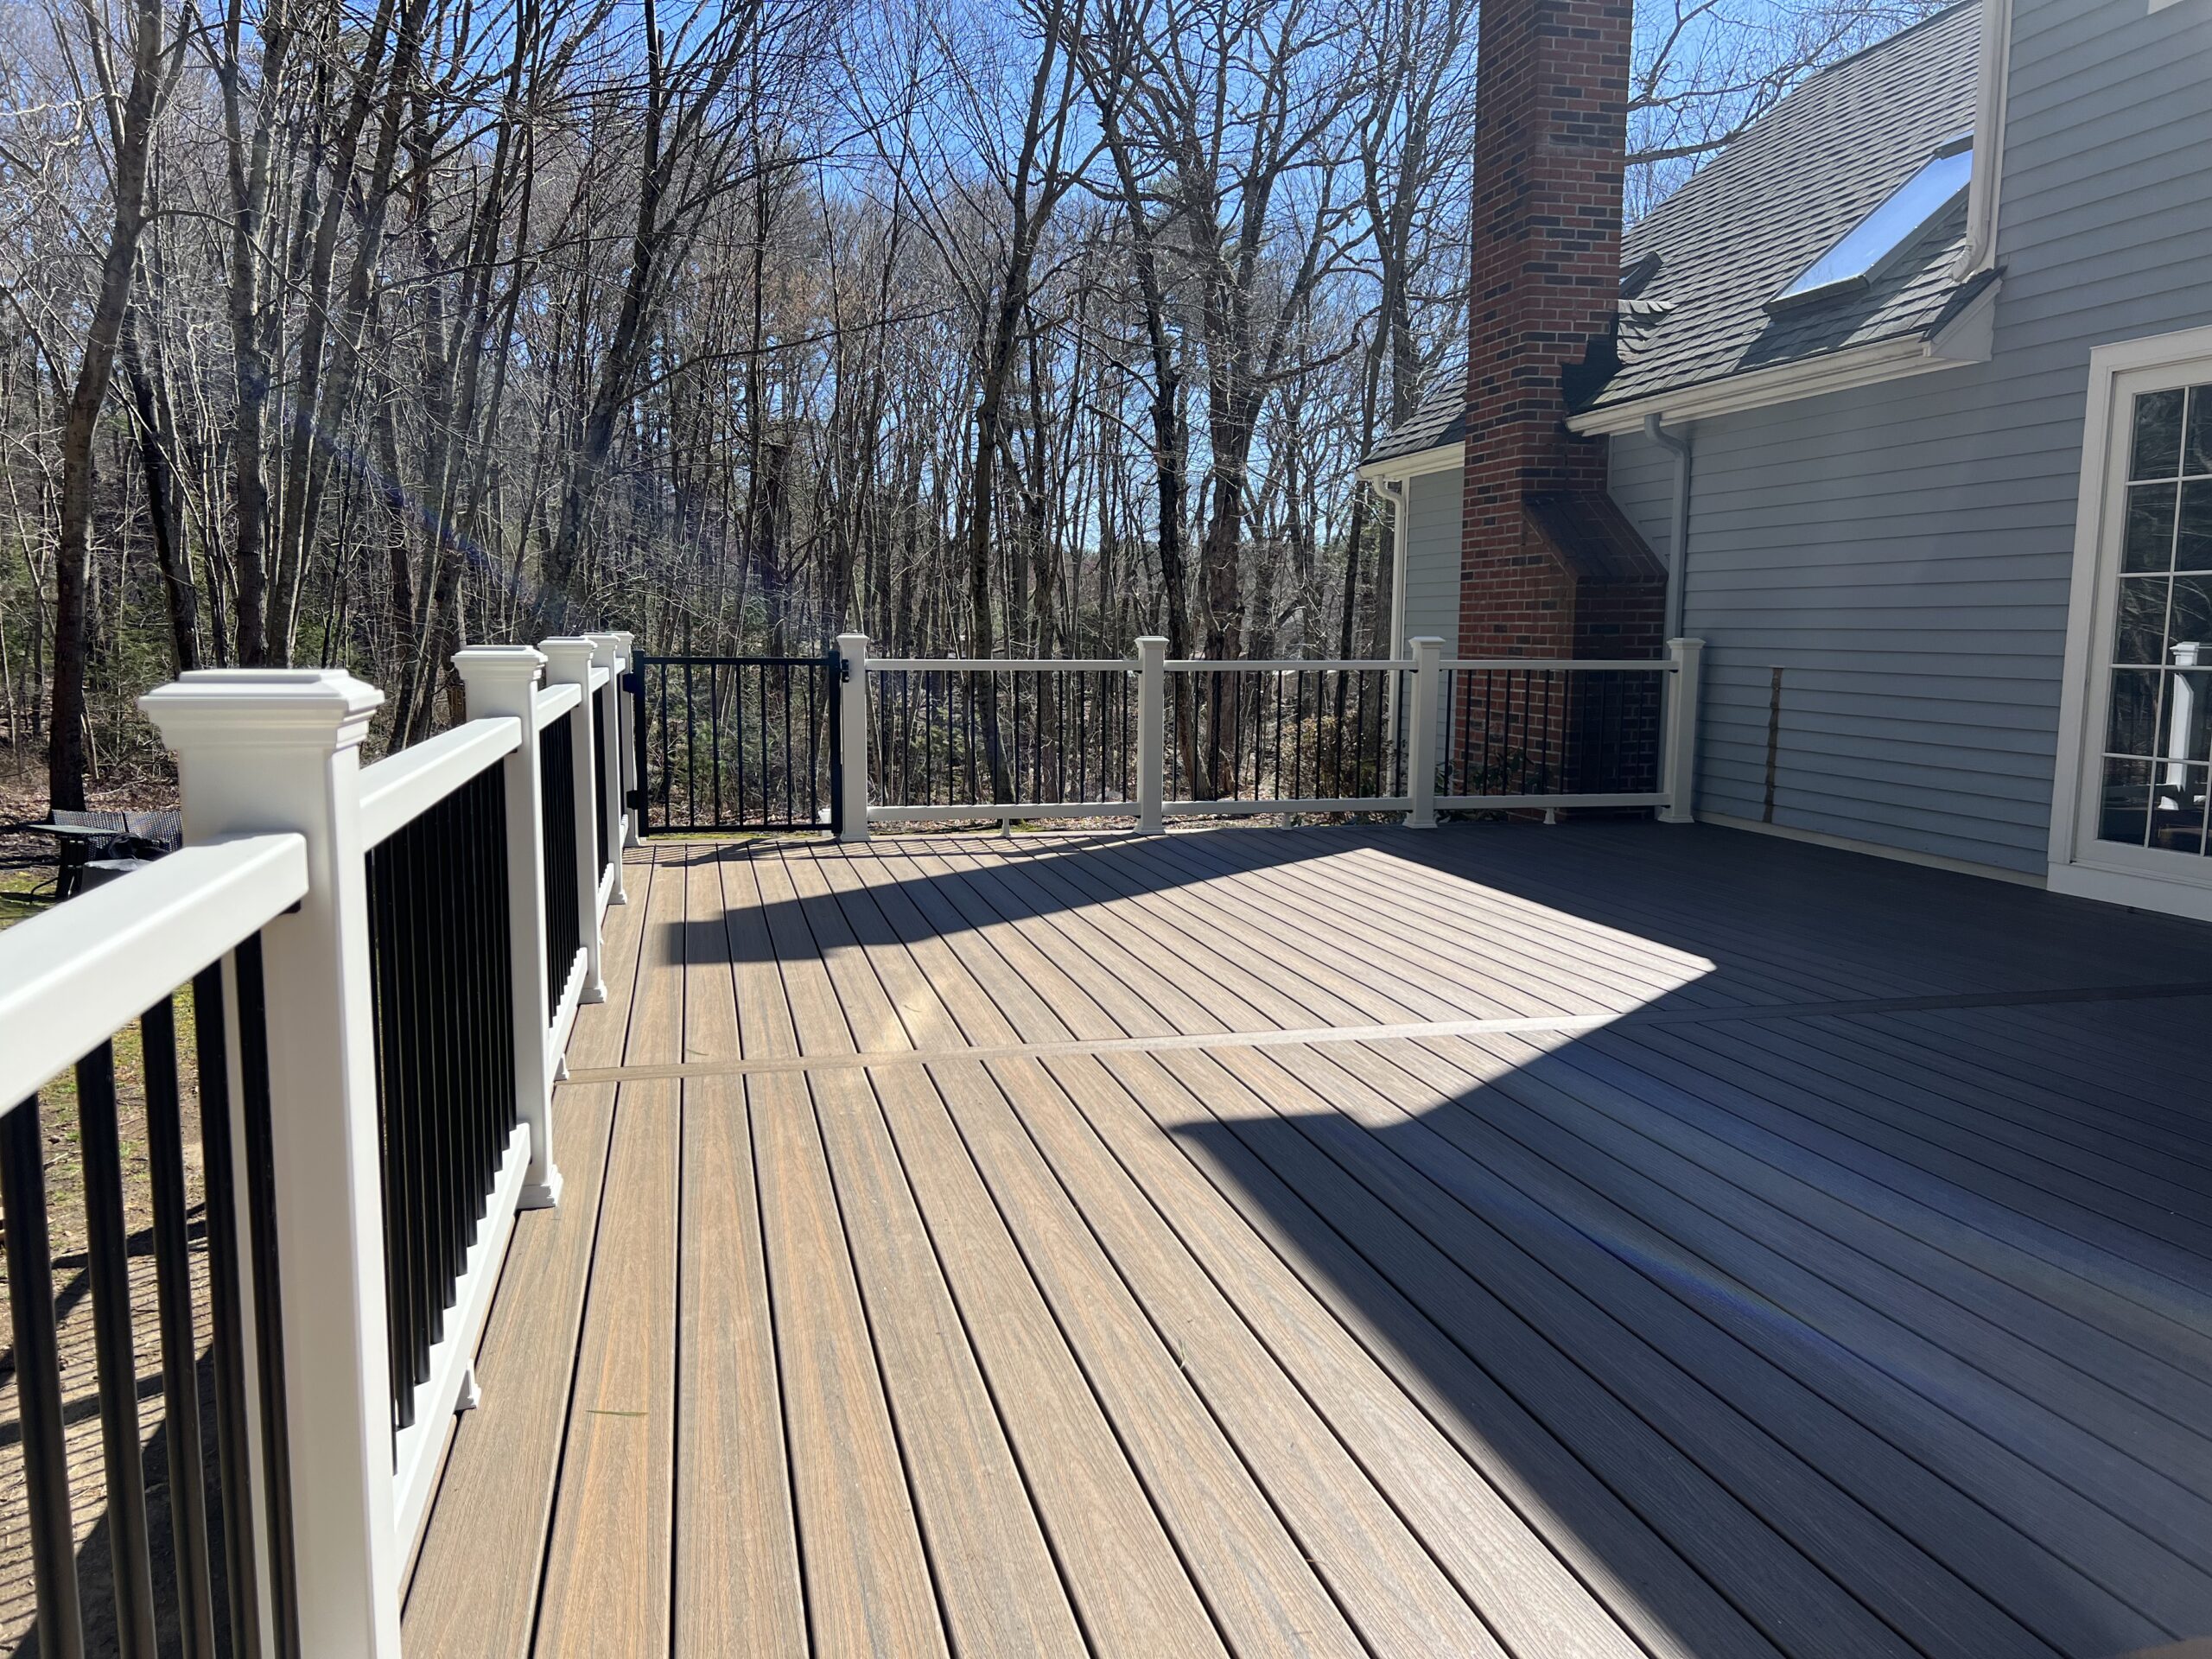 Trex deck with Toasted sand decking and white r railings.